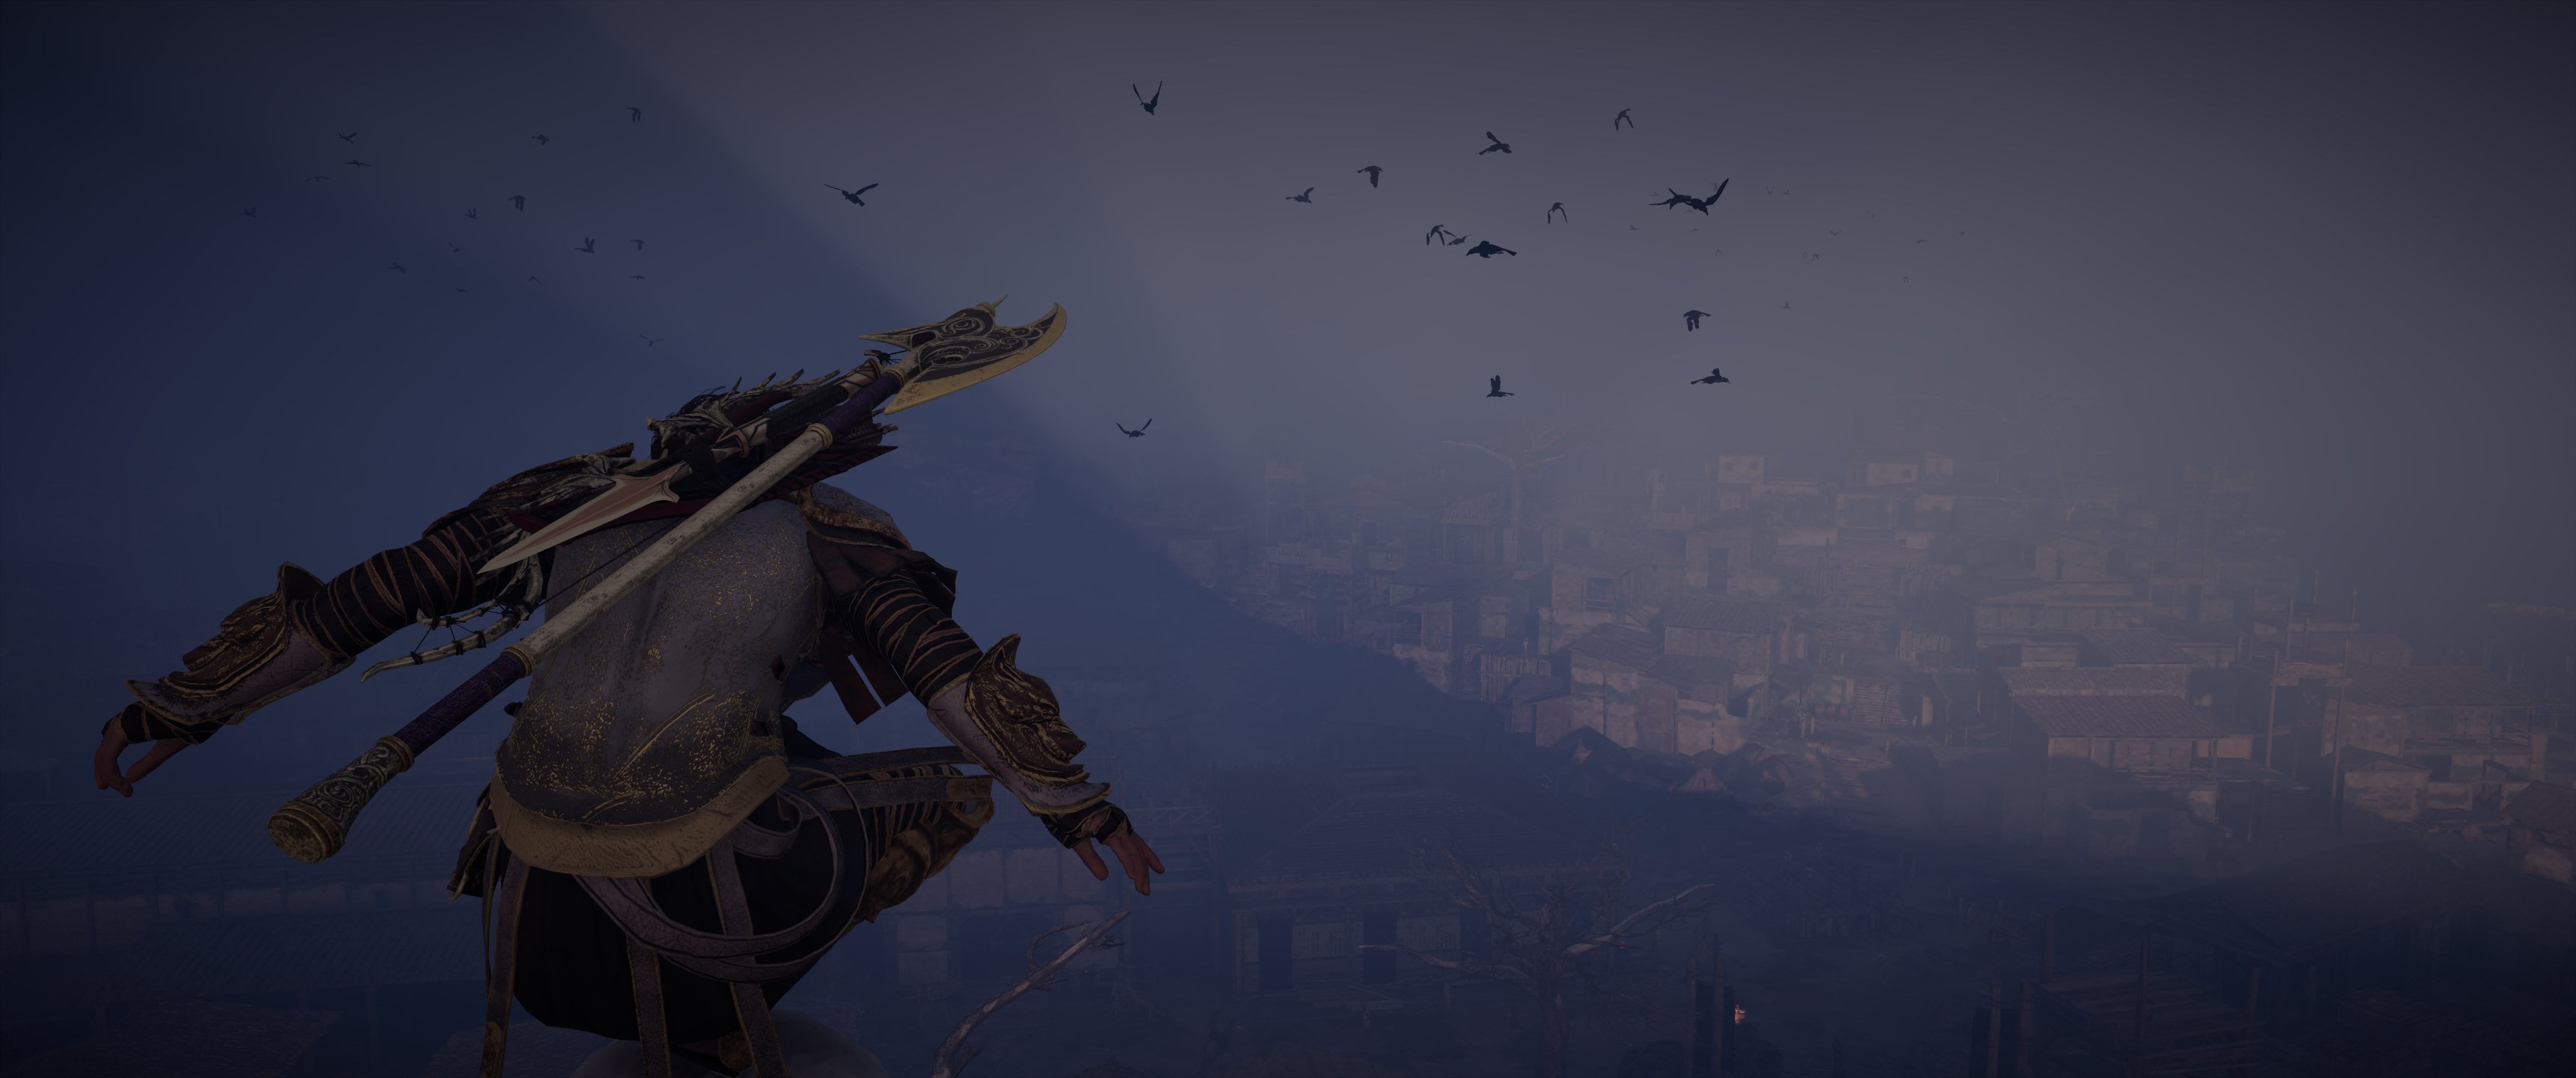 General 3440x1440 Assassin's Creed video games screen shot PC gaming